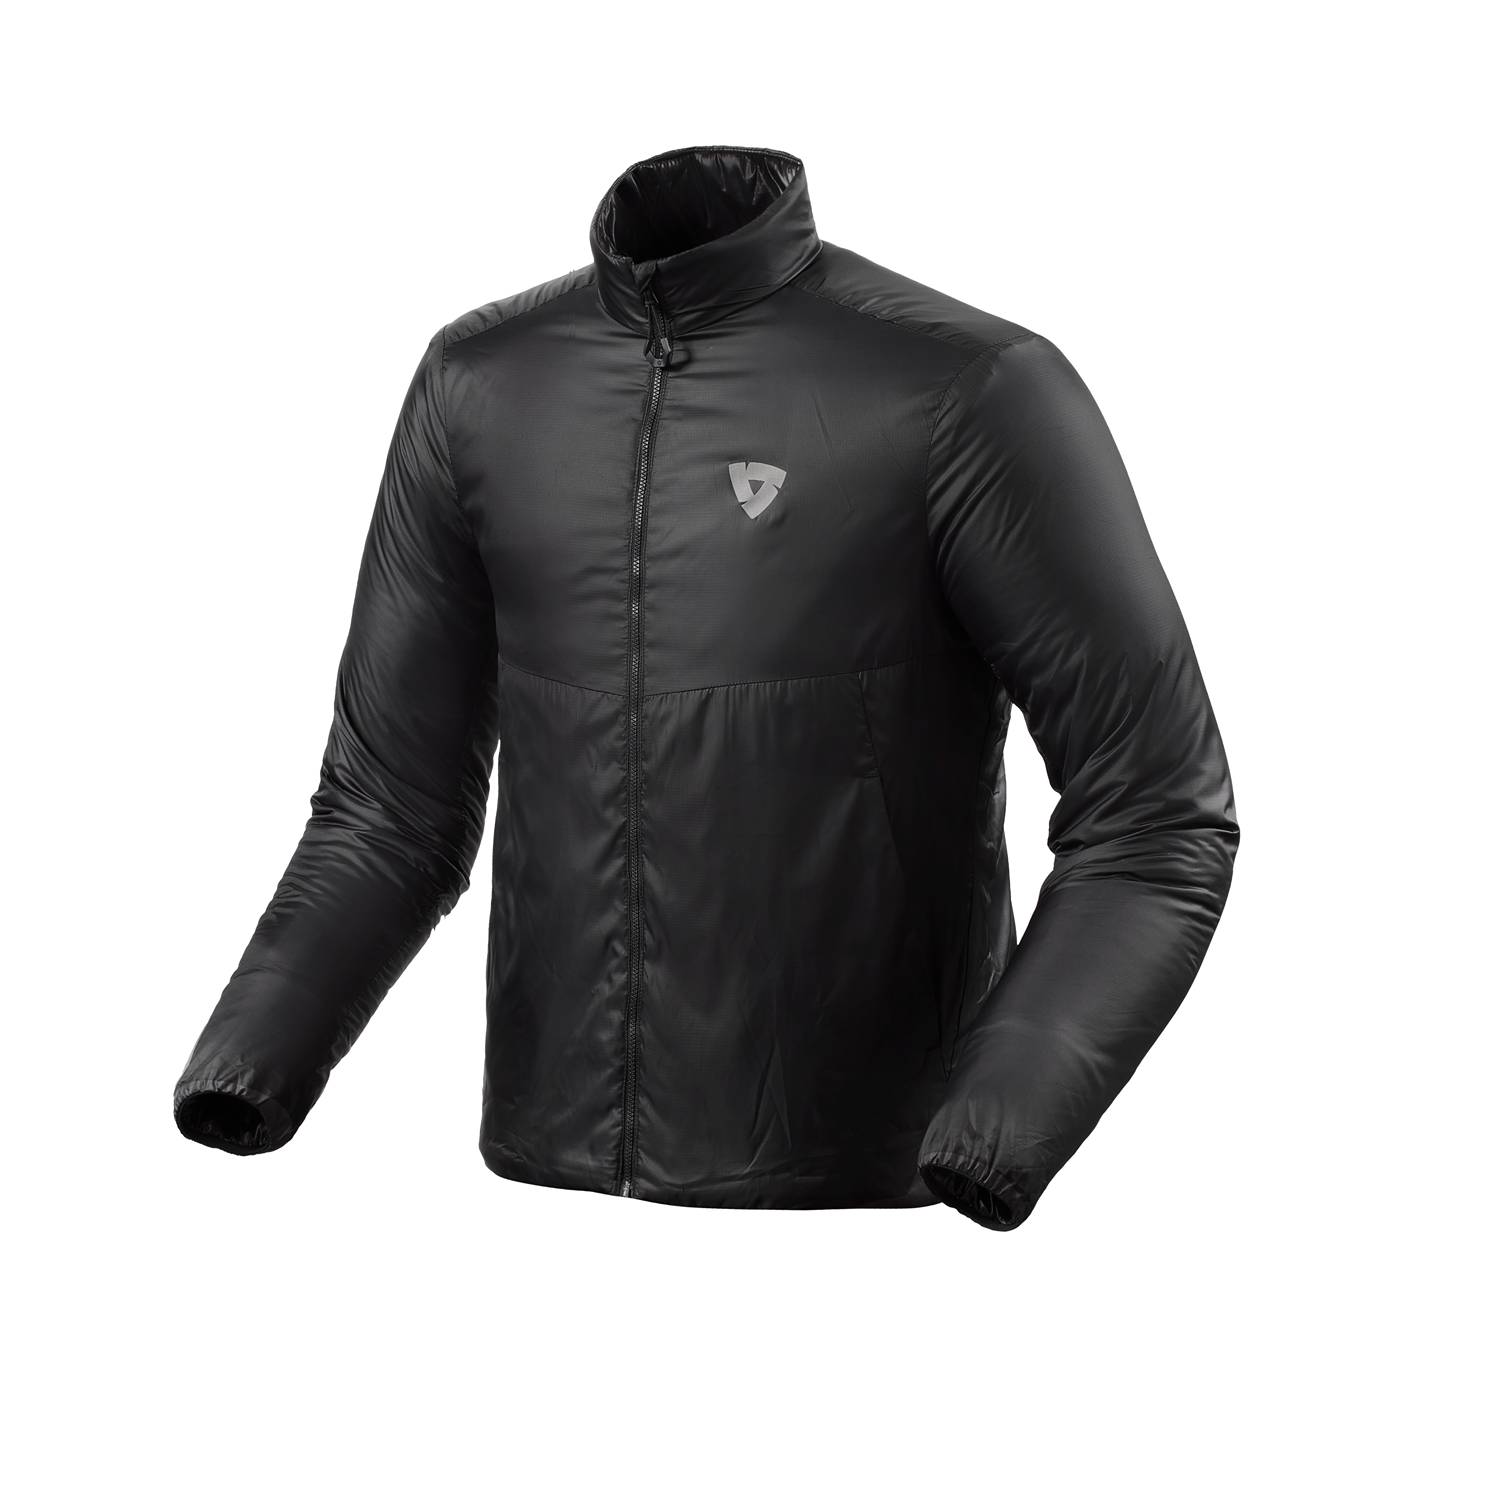 Image of EU REV'IT! Core 2 Mid Layer Jacket Black Taille S